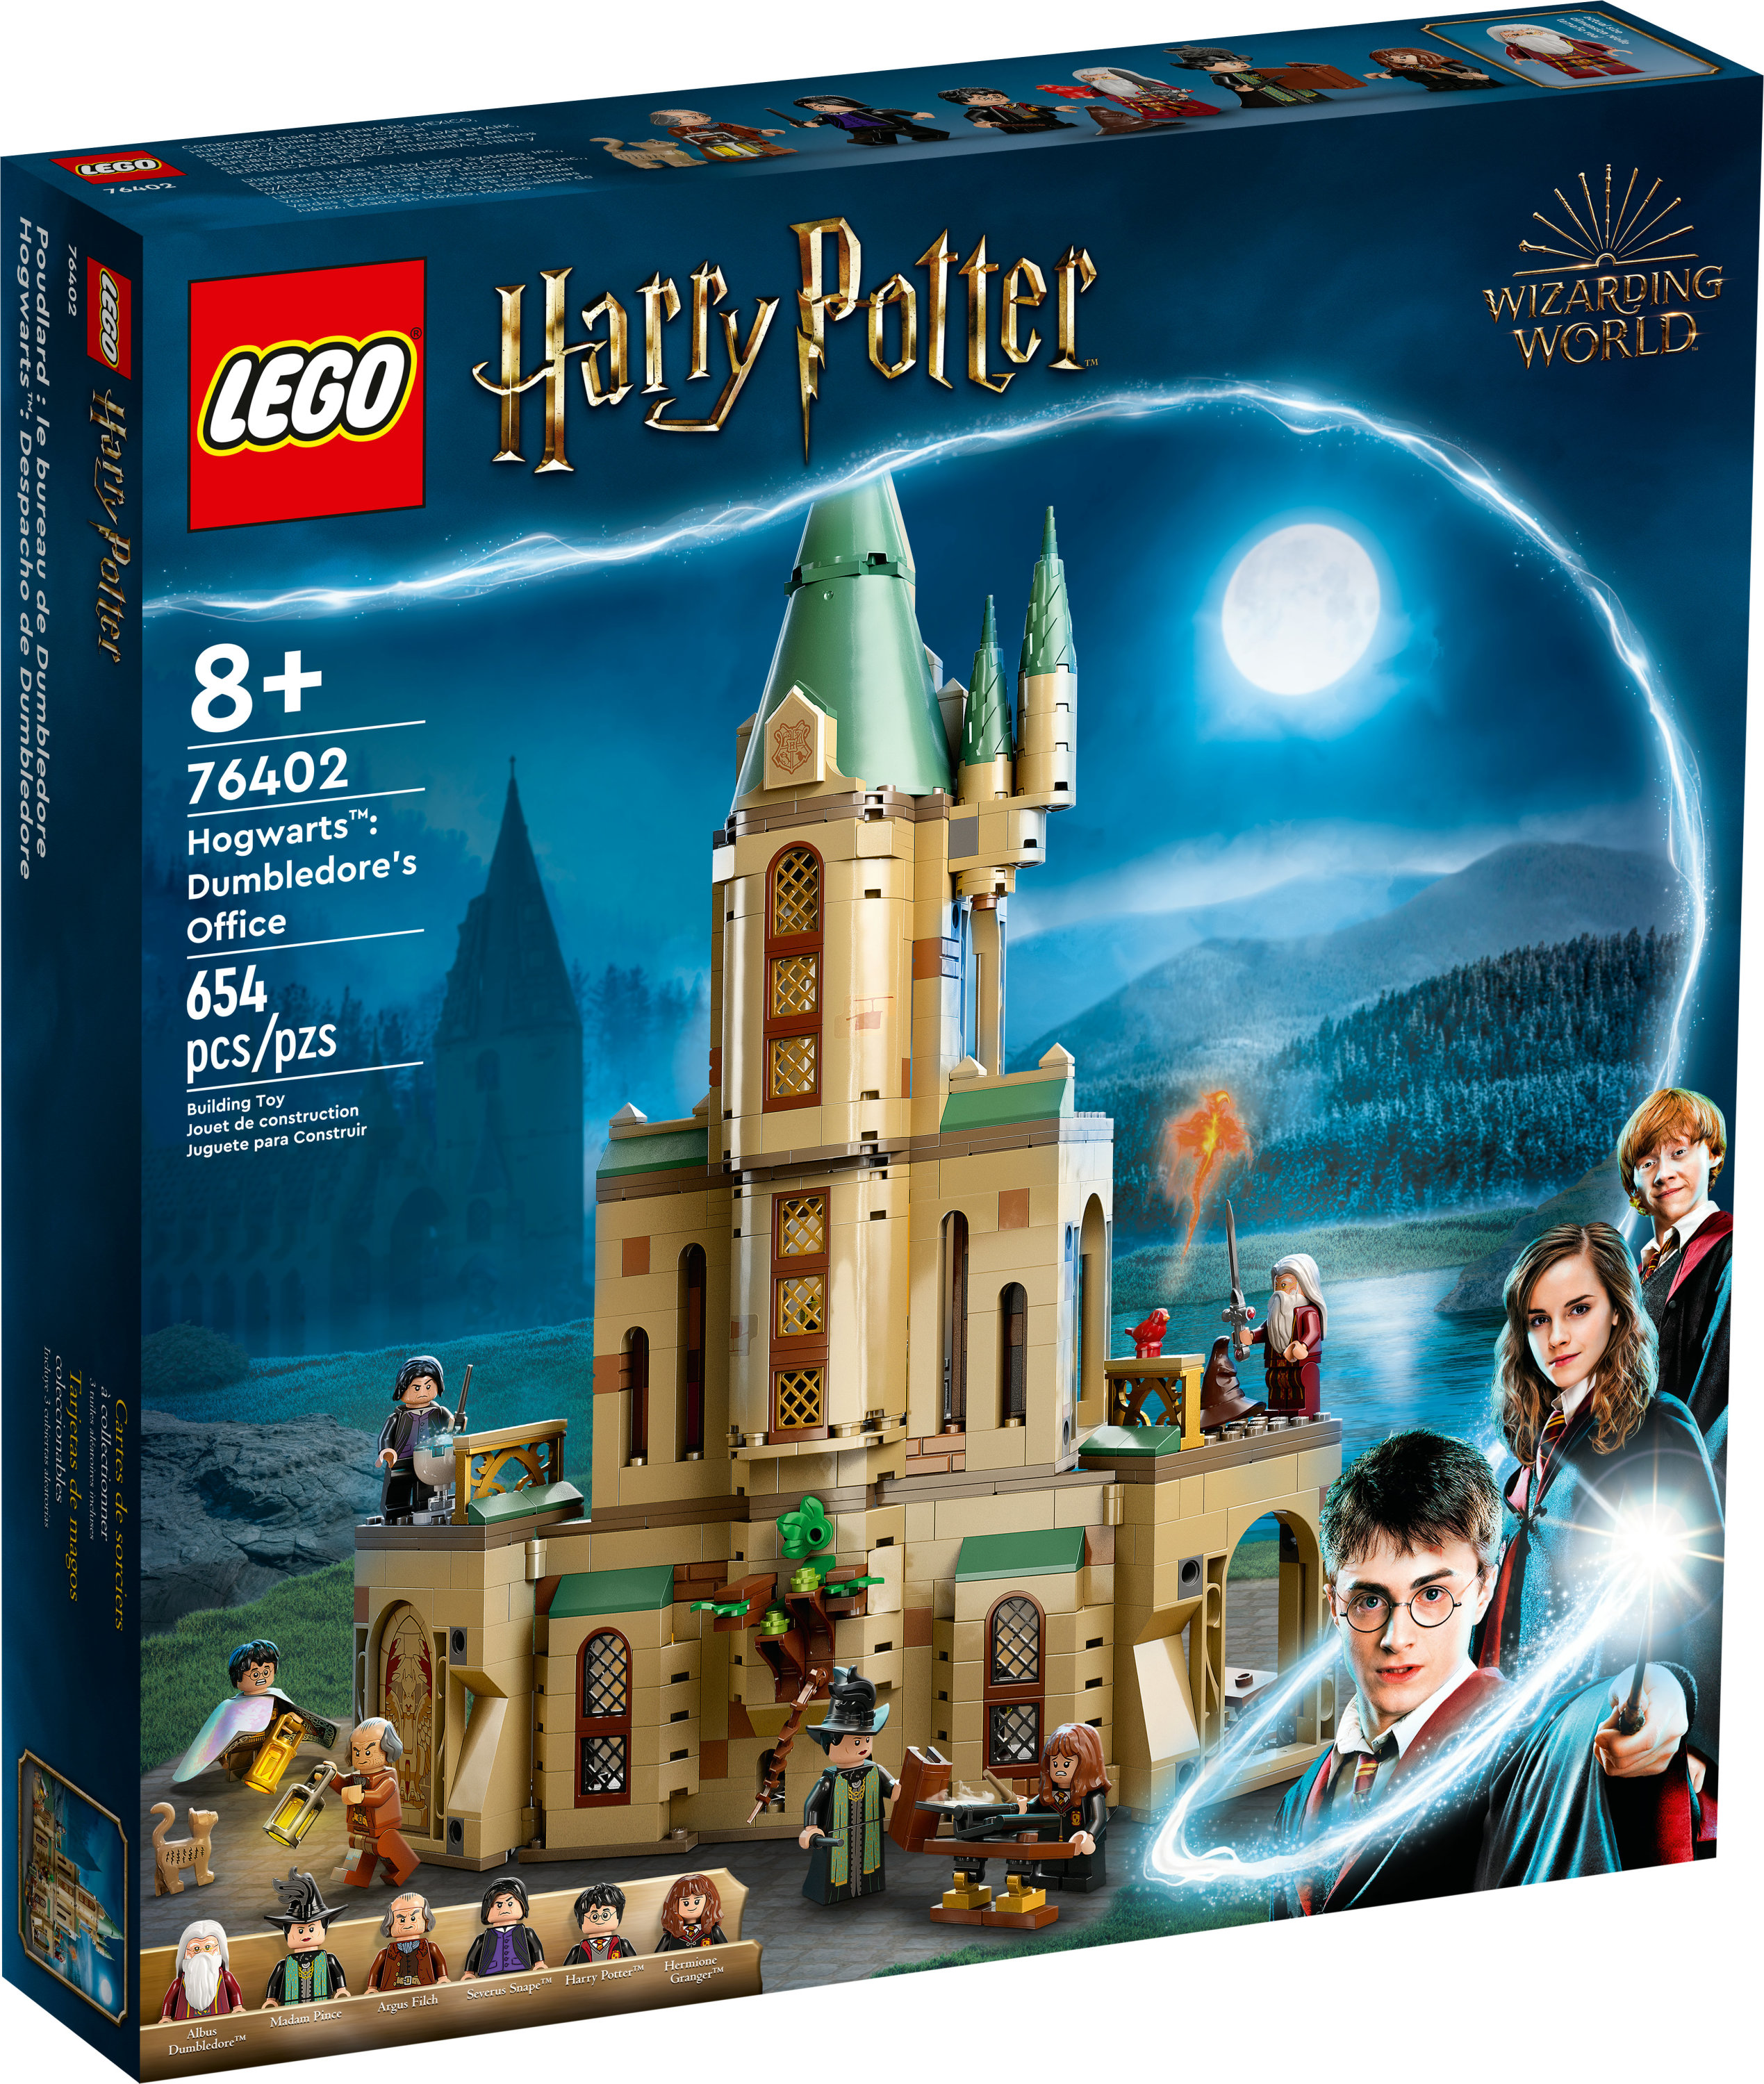 LEGO Harry Potter Hogwarts: Dumbledore’s Office 76402 Castle Toy, Set with Sorting Hat, Sword of Gryffindor and 6 Minifigures, for Kids Aged 8 Plus - image 3 of 8